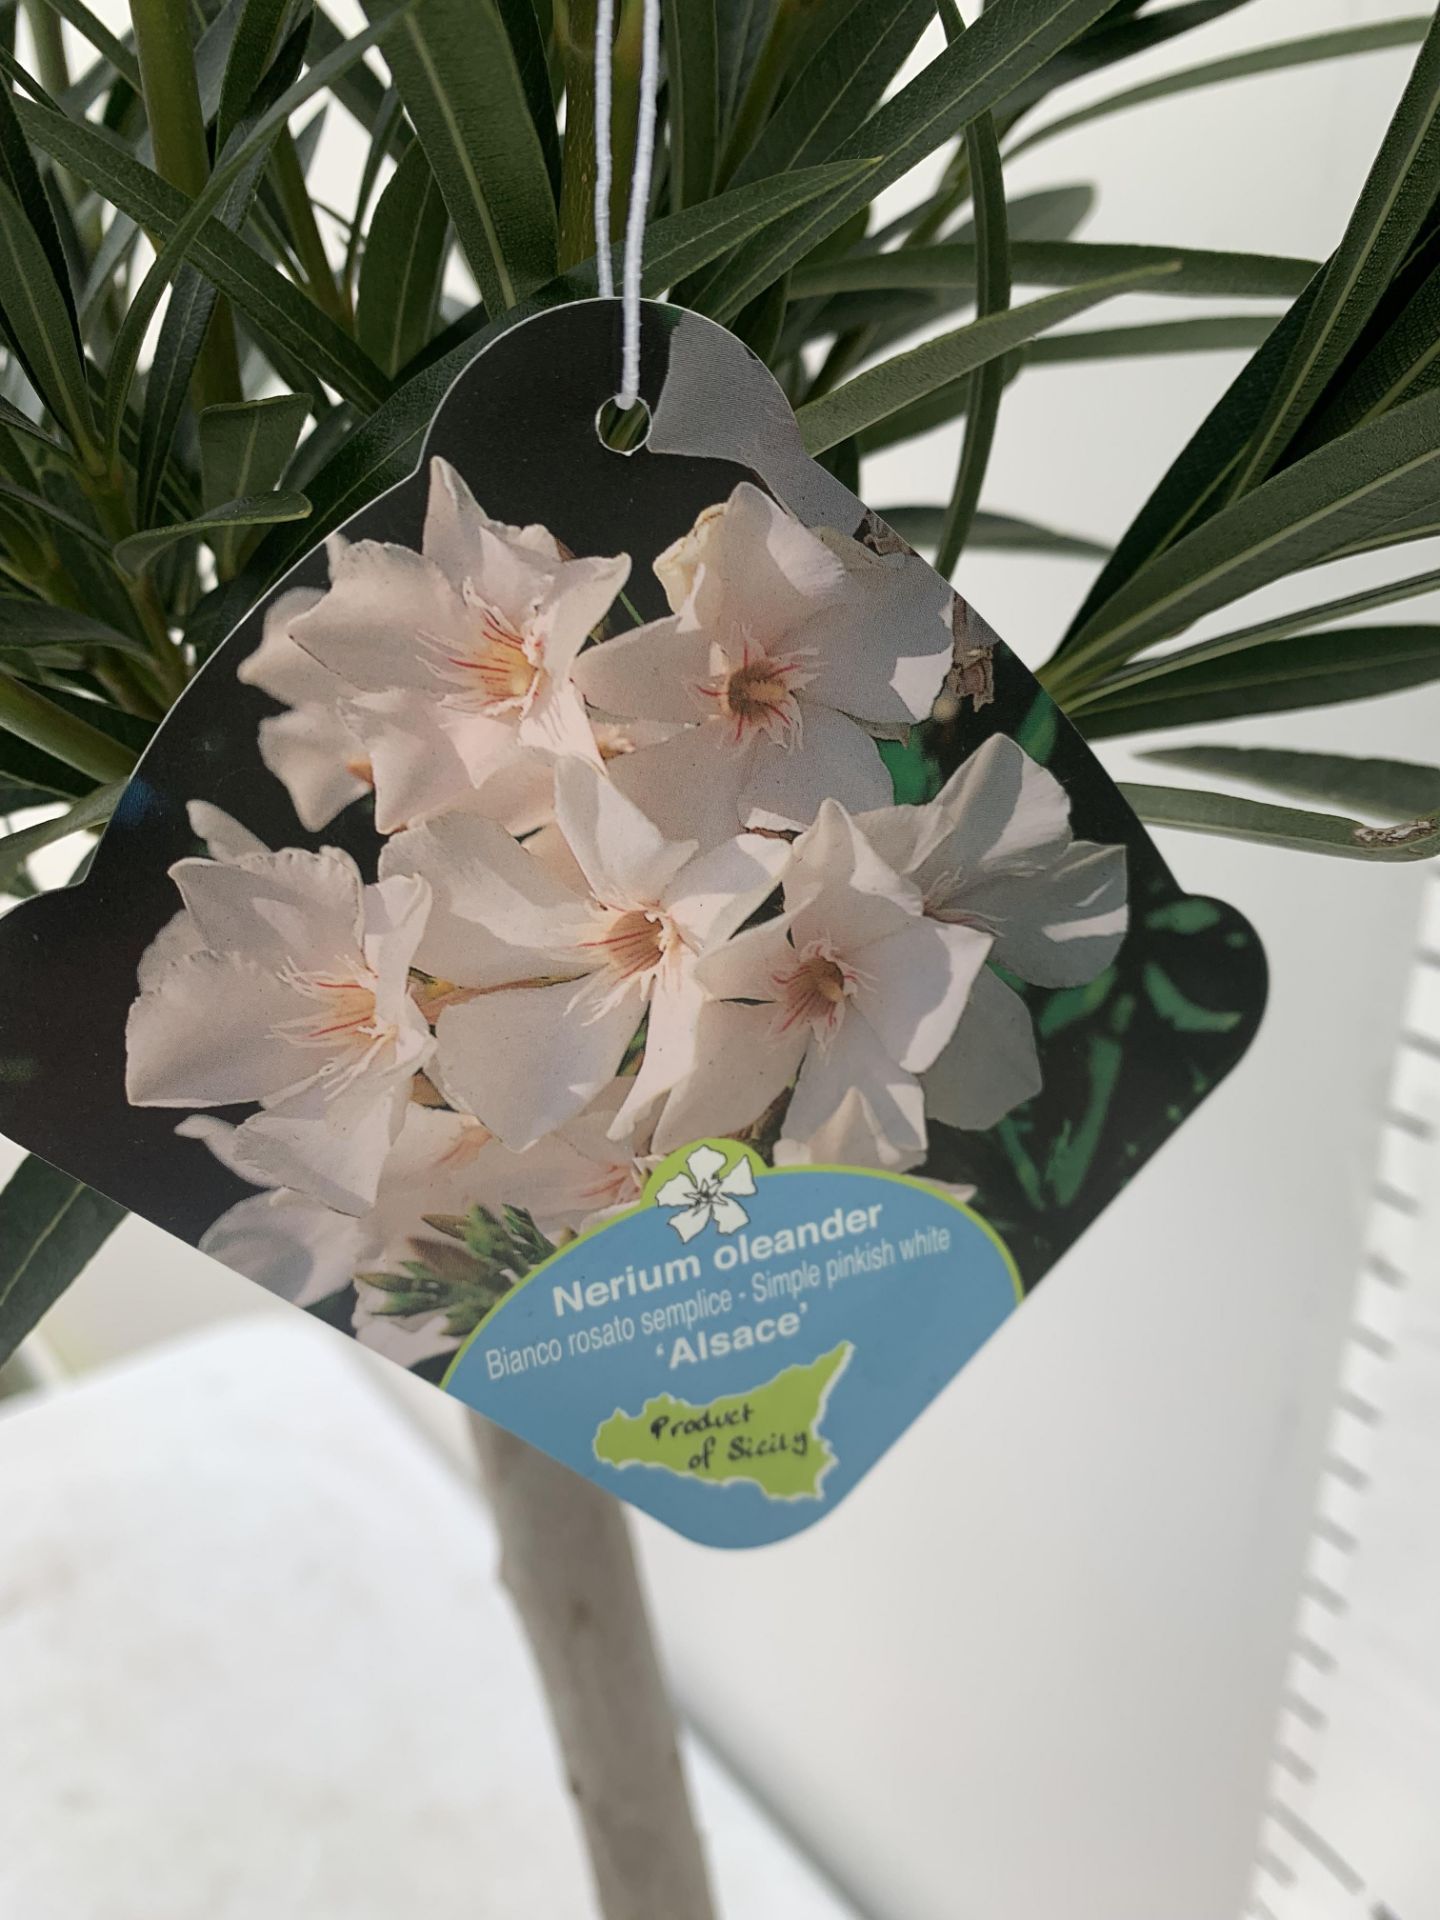 TWO OLEANDER NERIUM STANDARD TREES SIMPLE PINK ' EMILIE' AND PINKISH WHITE 'ALSACE' APPROX 1 METRE - Image 10 of 10